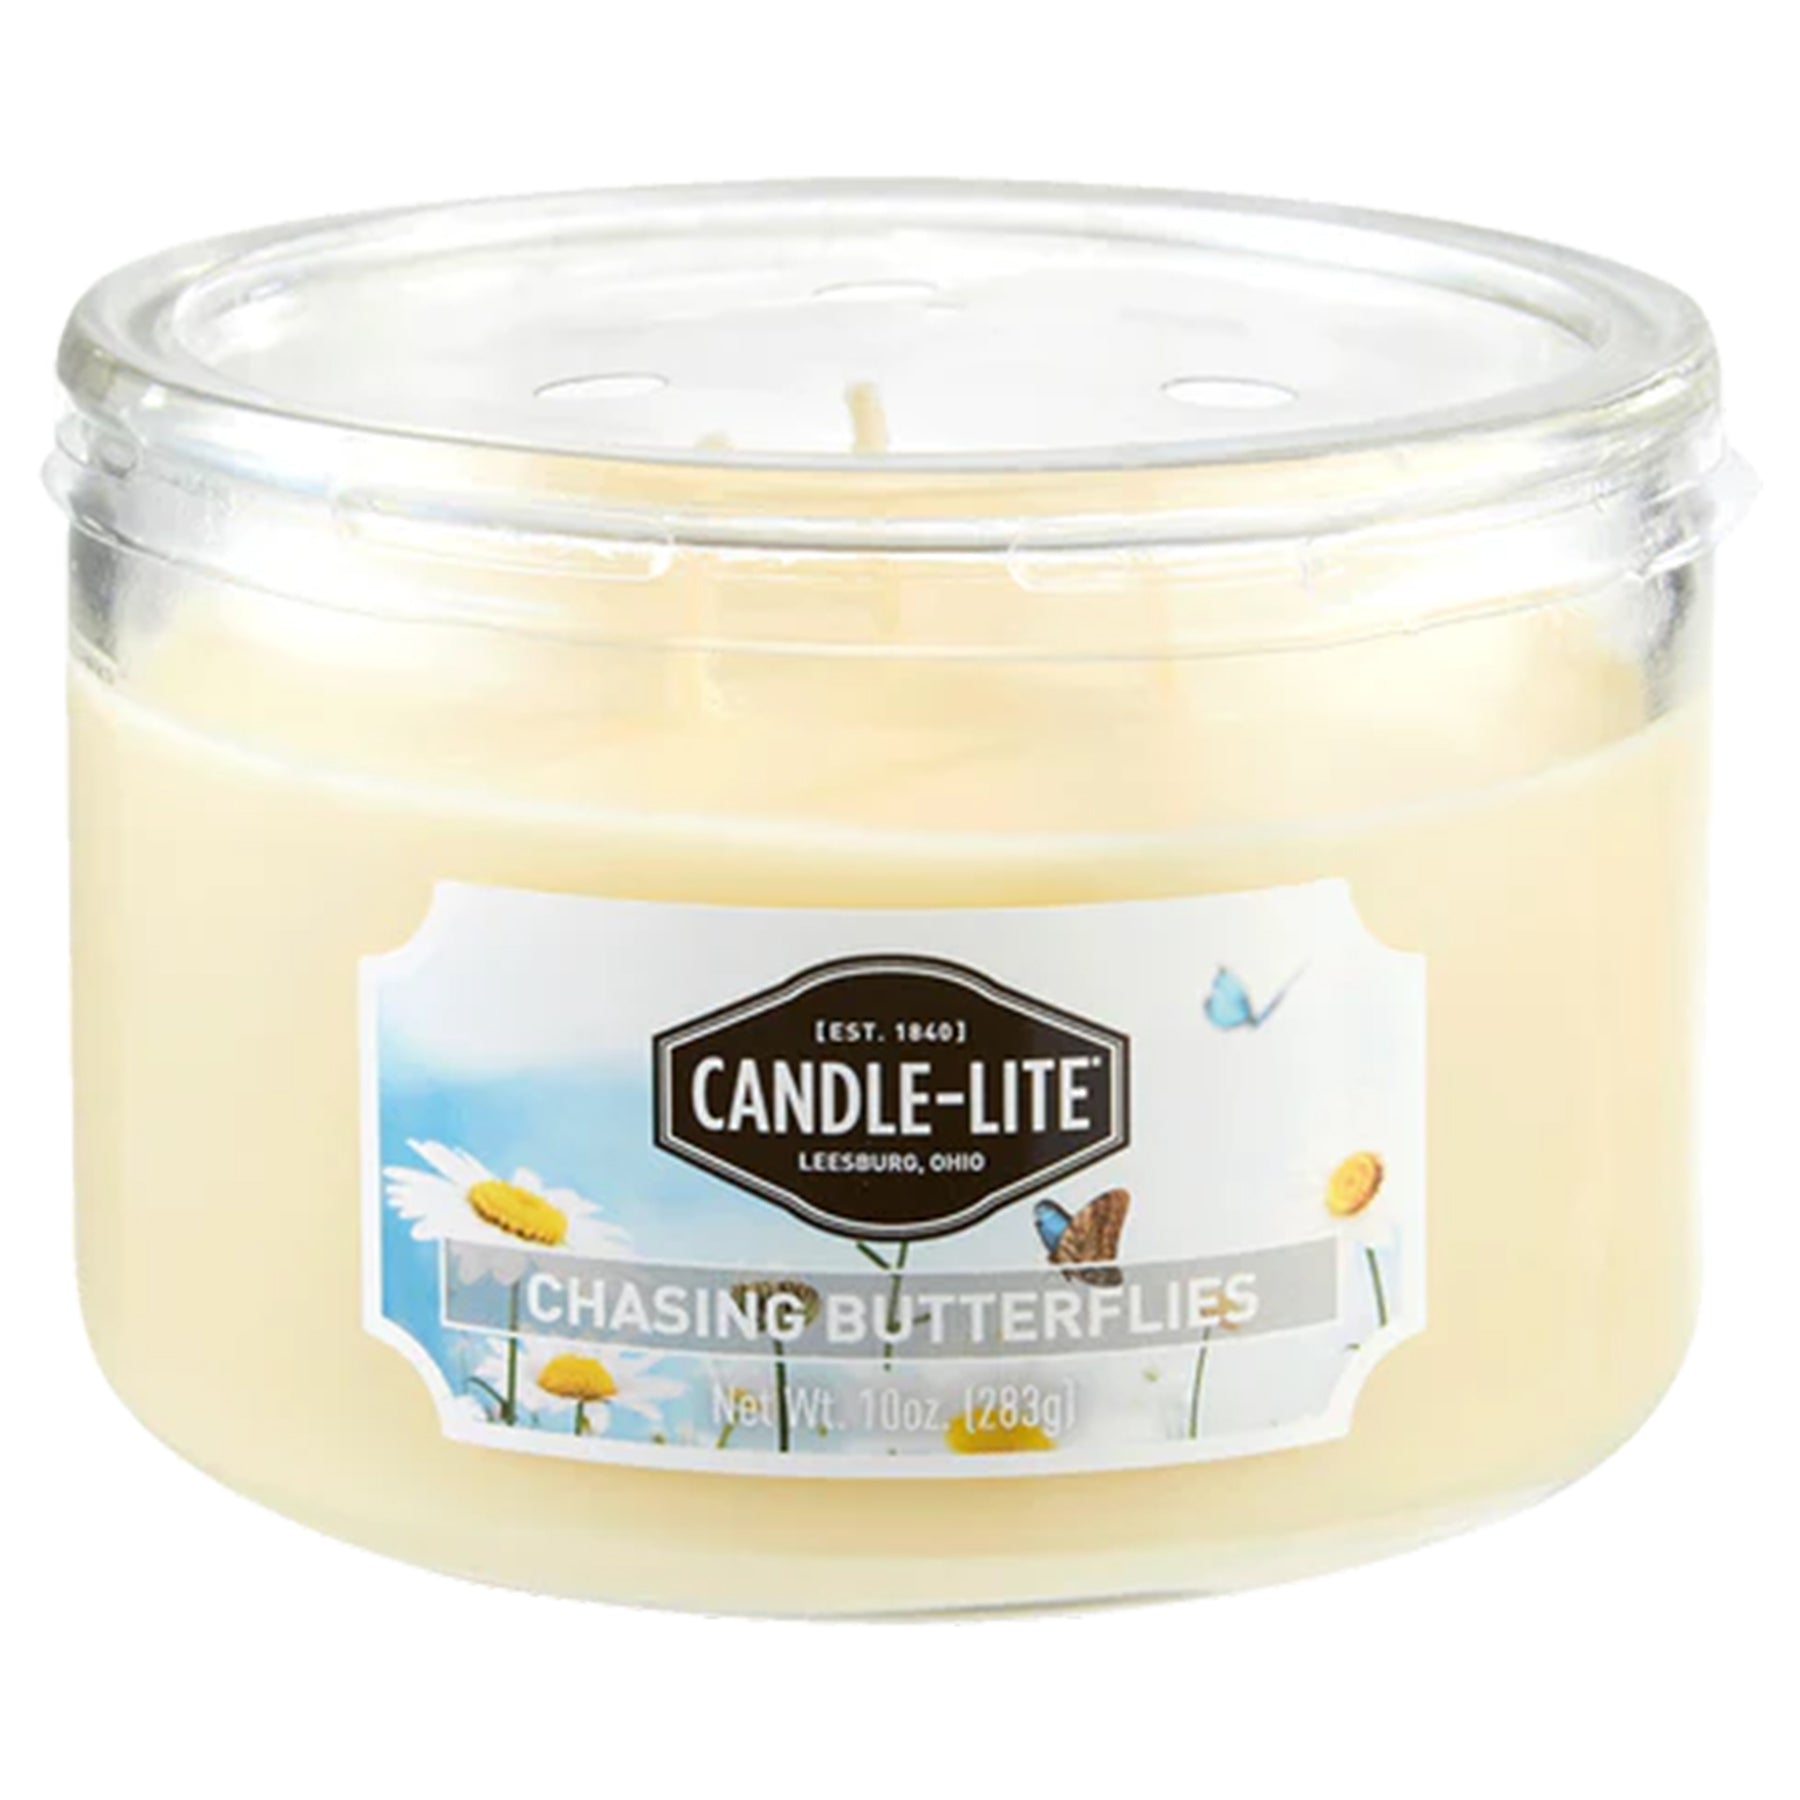 Candle with Fragrance - Chasing Butterflies